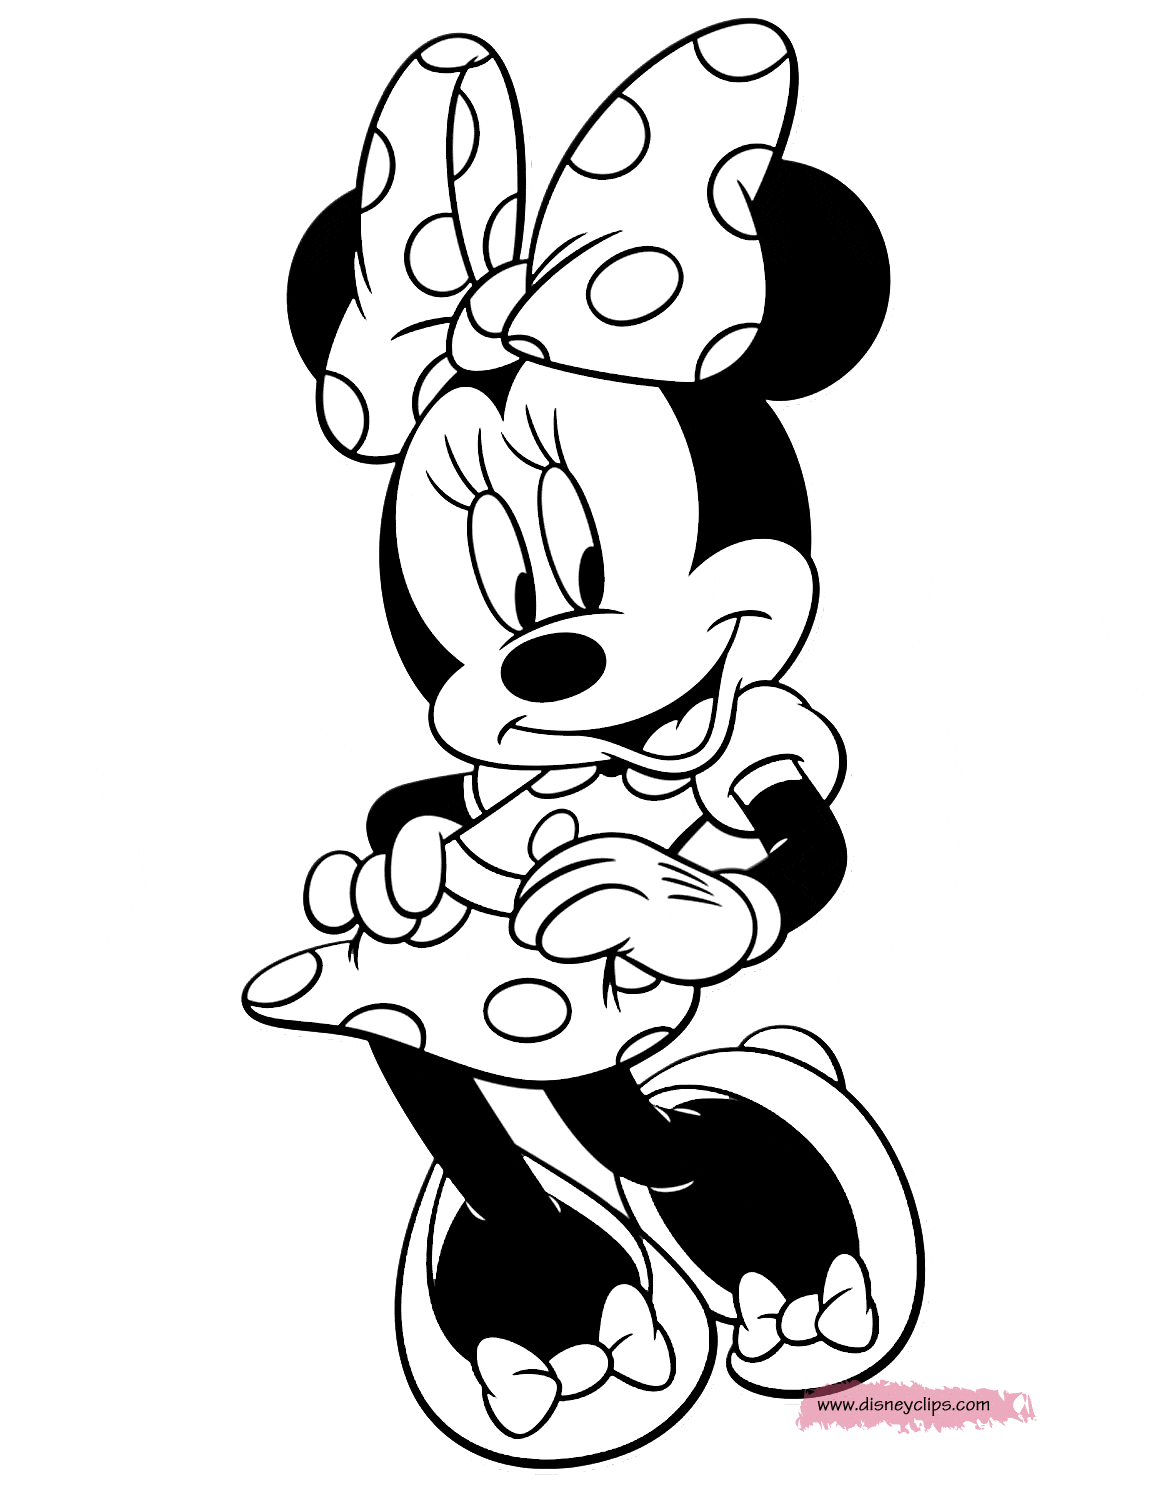 Disney Minnie Mouse Printable Coloring Pages 5 | Disney ...